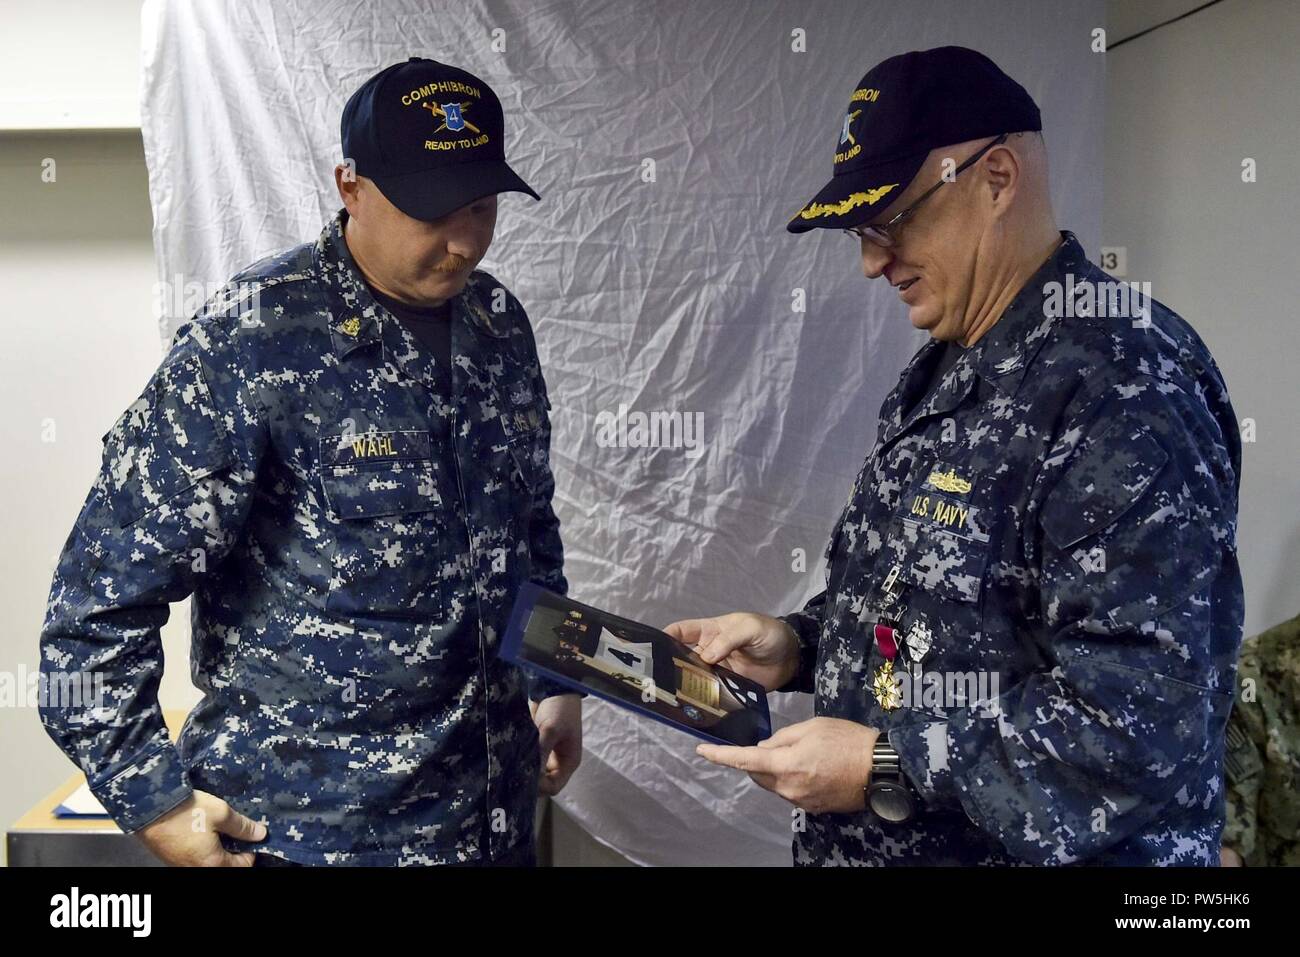 MAYPORT, Fla. (Sept. 20, 2017) Chief Engineman Timothy Wahl, the senior enlisted leader of Amphibious Squadron (PHIBRON) 4, presents Capt. Kirk A. Weatherly with a farewell gift during a change of command ceremony aboard the amphibious assault ship USS Iwo Jima (LHD 7). During the ceremony Capt. Jack L. Killman relieved Weatherly as commander, PHIBRON 4. PHIBRON 4 is composed of Iwo Jima, the transport dock ship USS New York (LPD 21) and the dock landing ship USS Oak Hill (LSD 51). Also assigned are Fleet Surgical Team (FST) 8, Tactical Air Squadron (TACRON) 22, Assault Craft Unit (ACU) 2, ACU Stock Photo